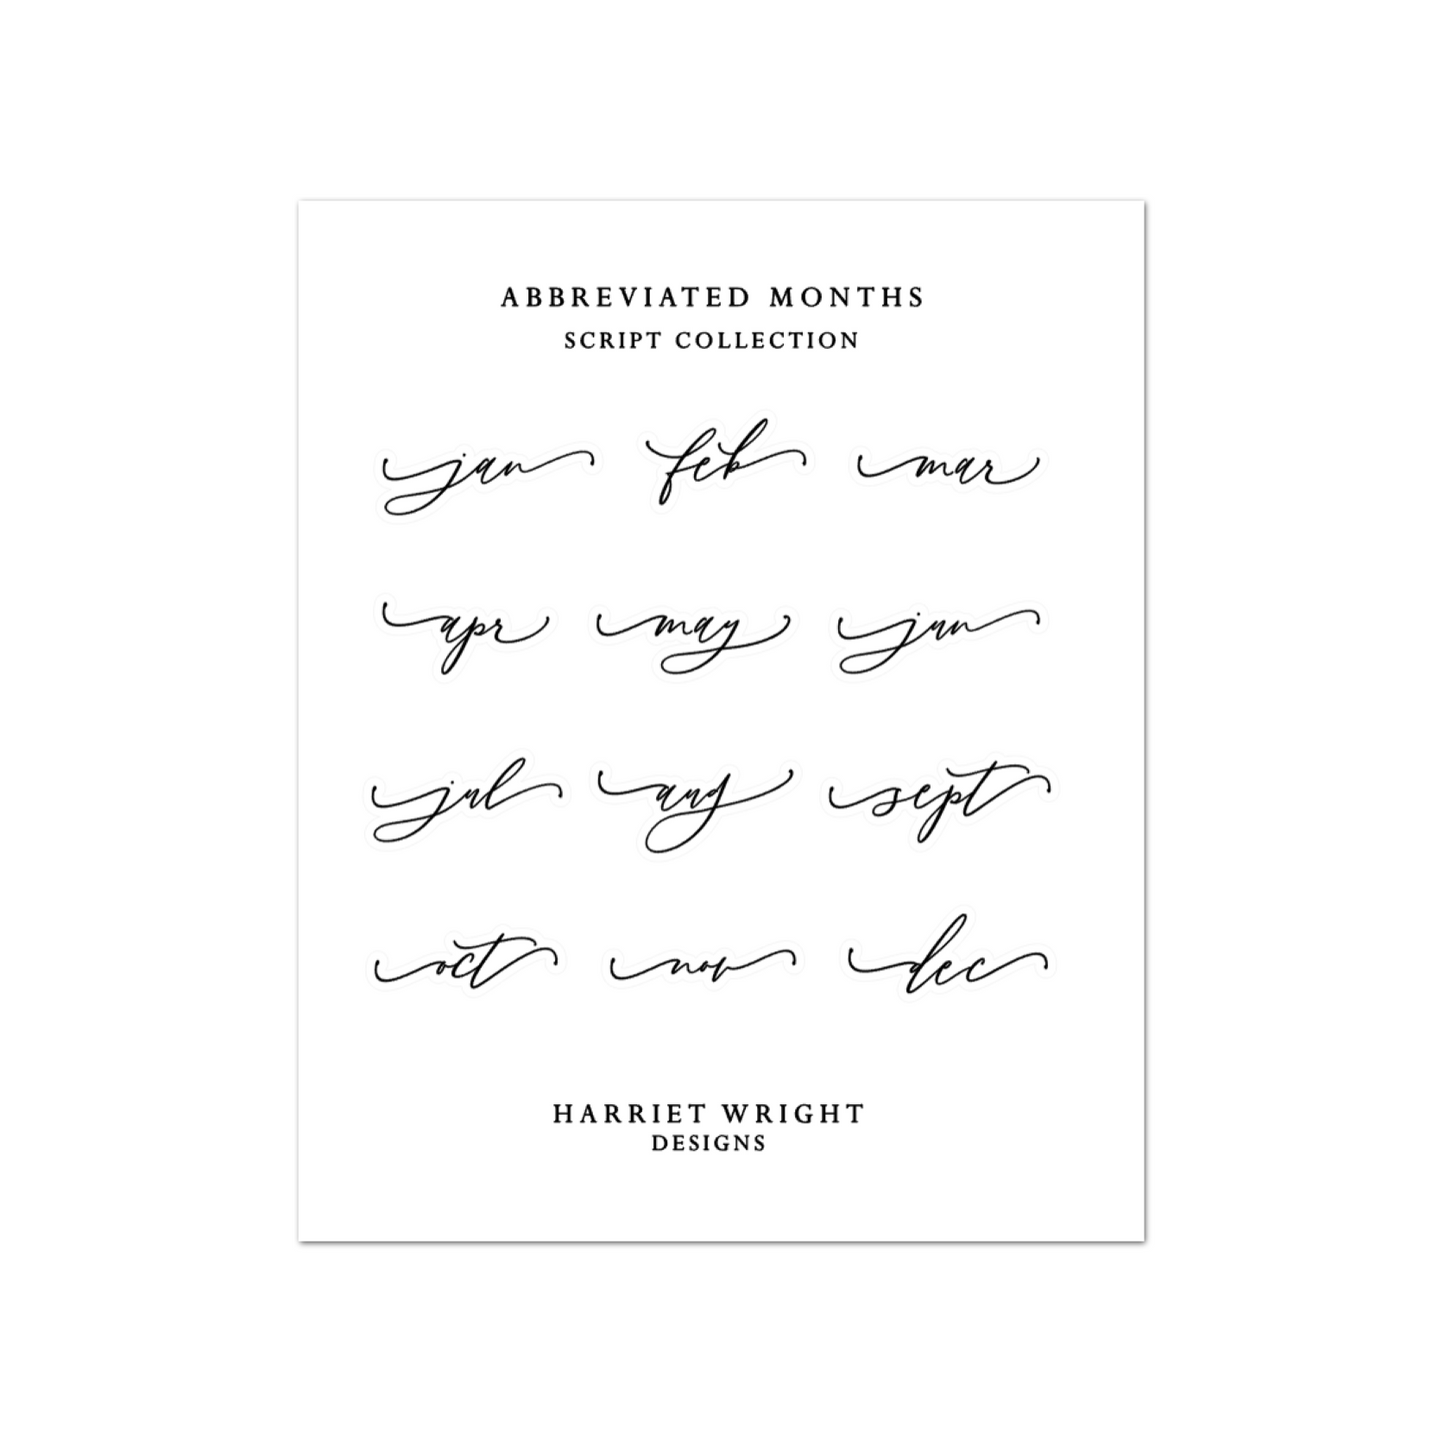 Abbreviated Months || Script Collection